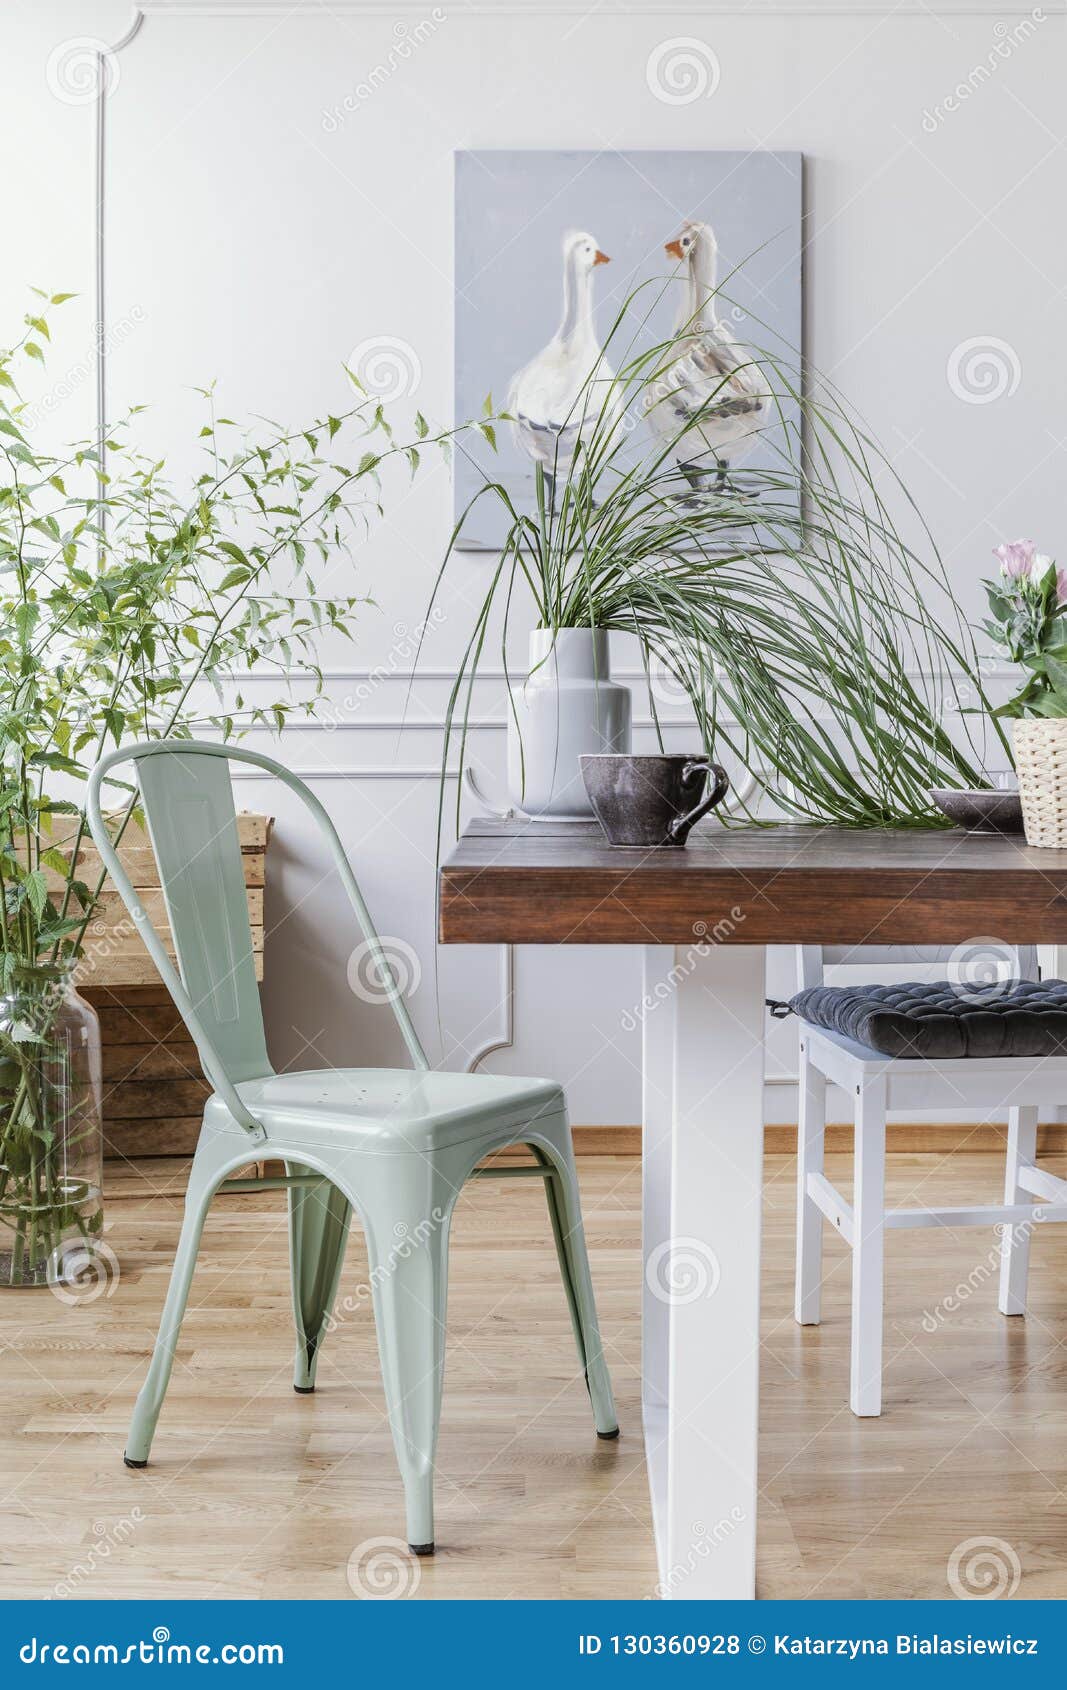 Vertical View Of Mint Green Chair Next To Wooden Table With